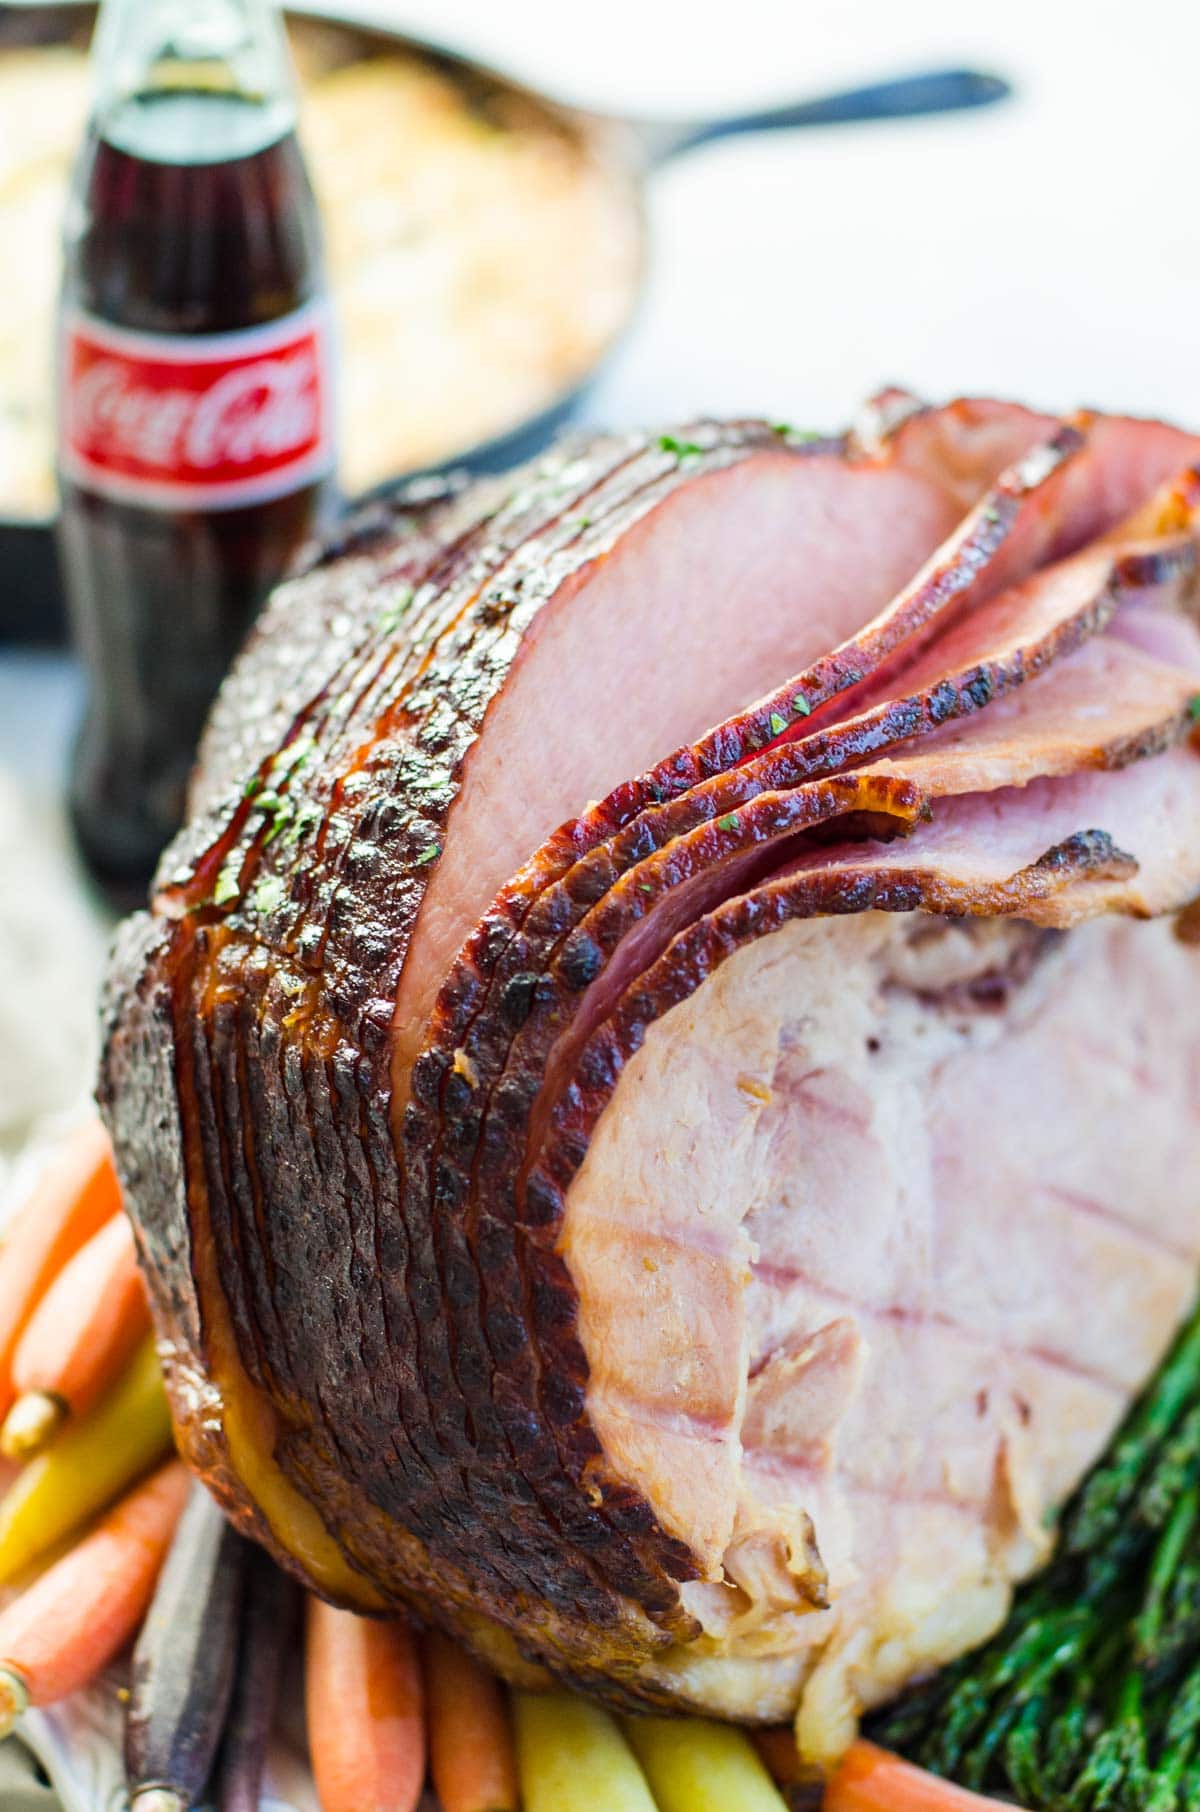 A cooked sliced ham in front of a bottle of coca cola.